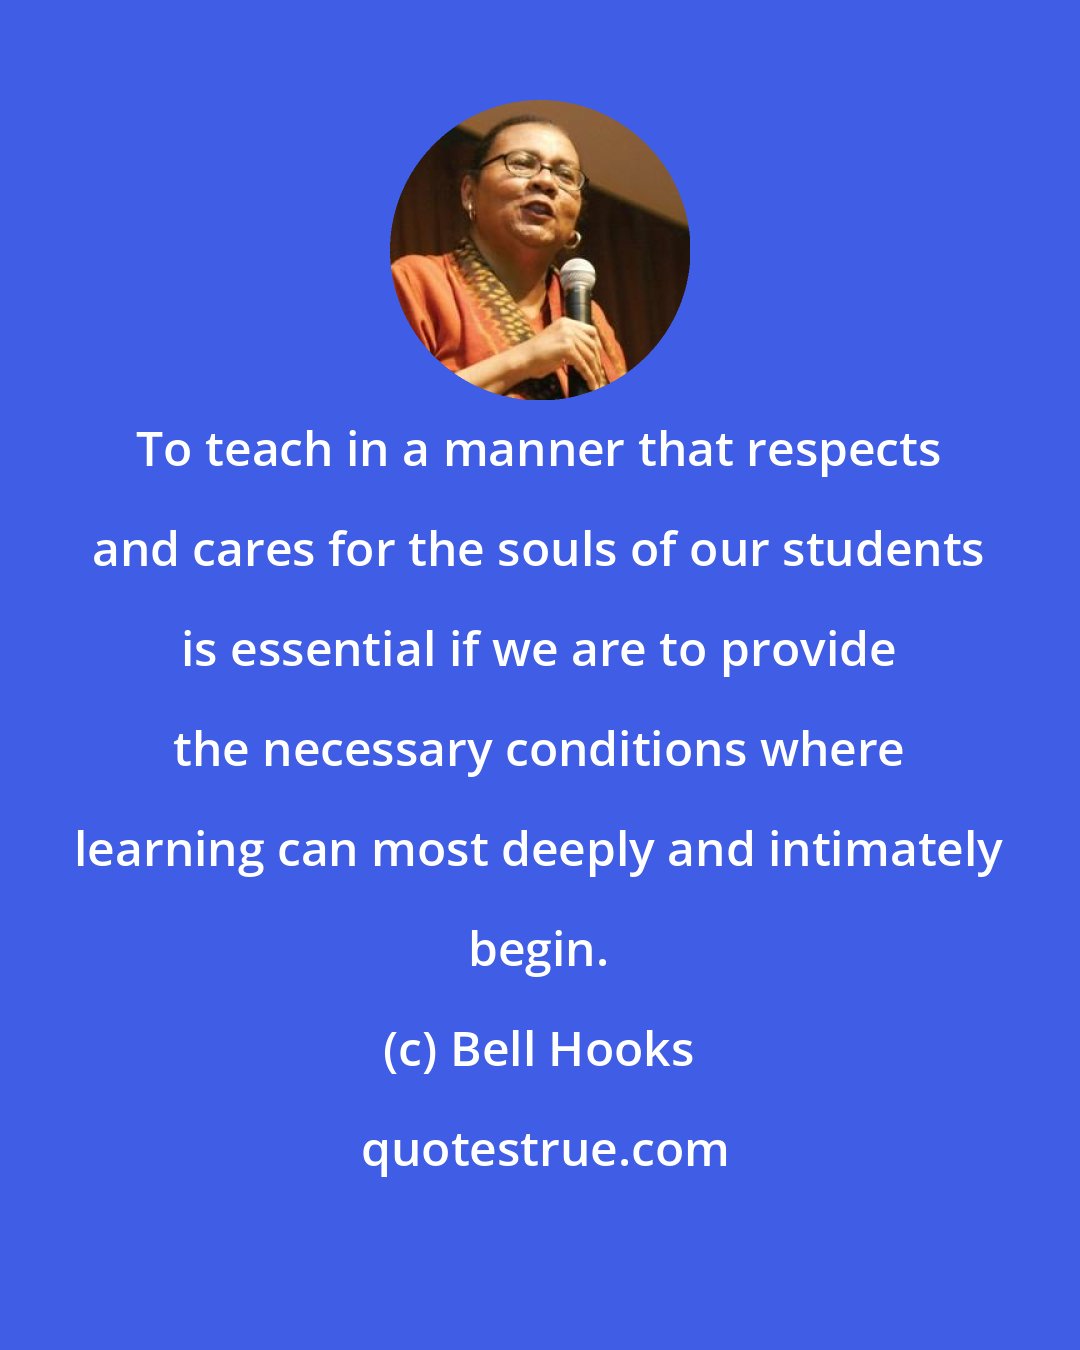 Bell Hooks: To teach in a manner that respects and cares for the souls of our students is essential if we are to provide the necessary conditions where learning can most deeply and intimately begin.